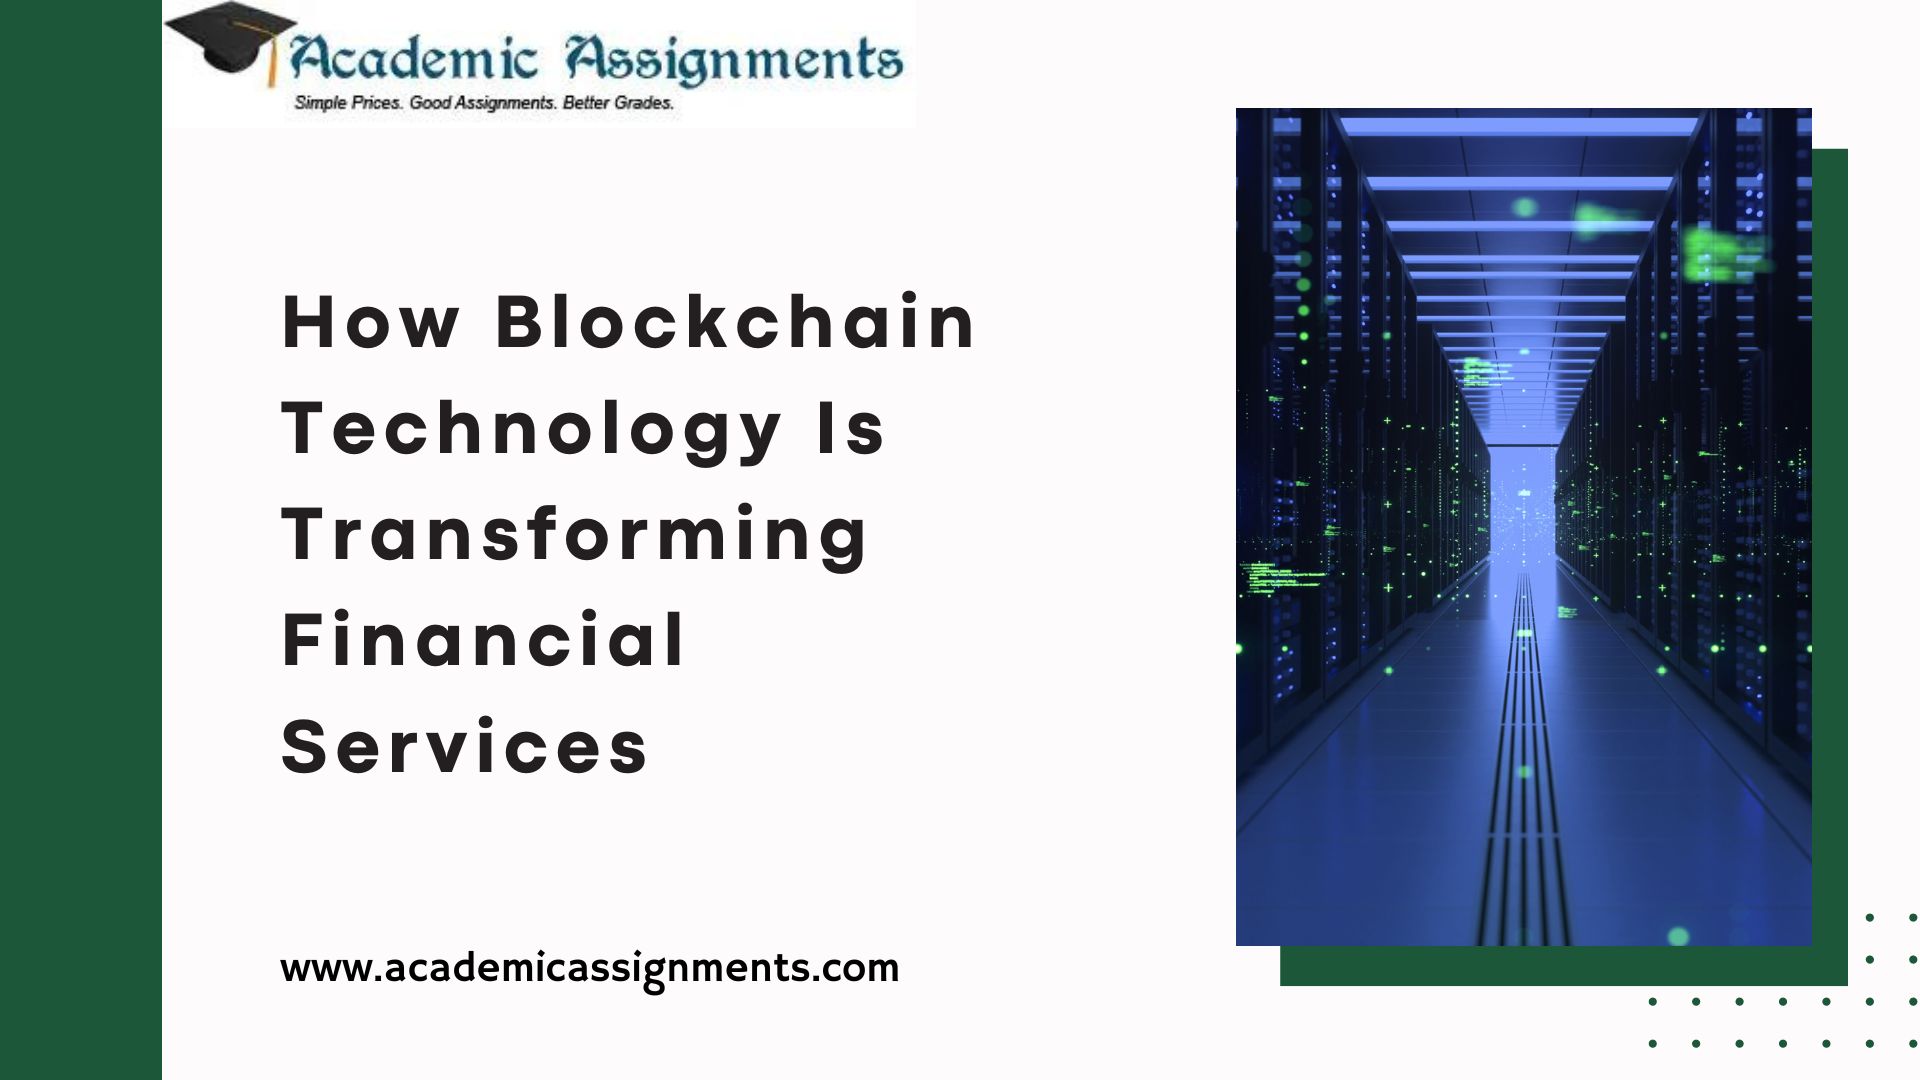 How Blockchain Technology Is Transforming Financial Services